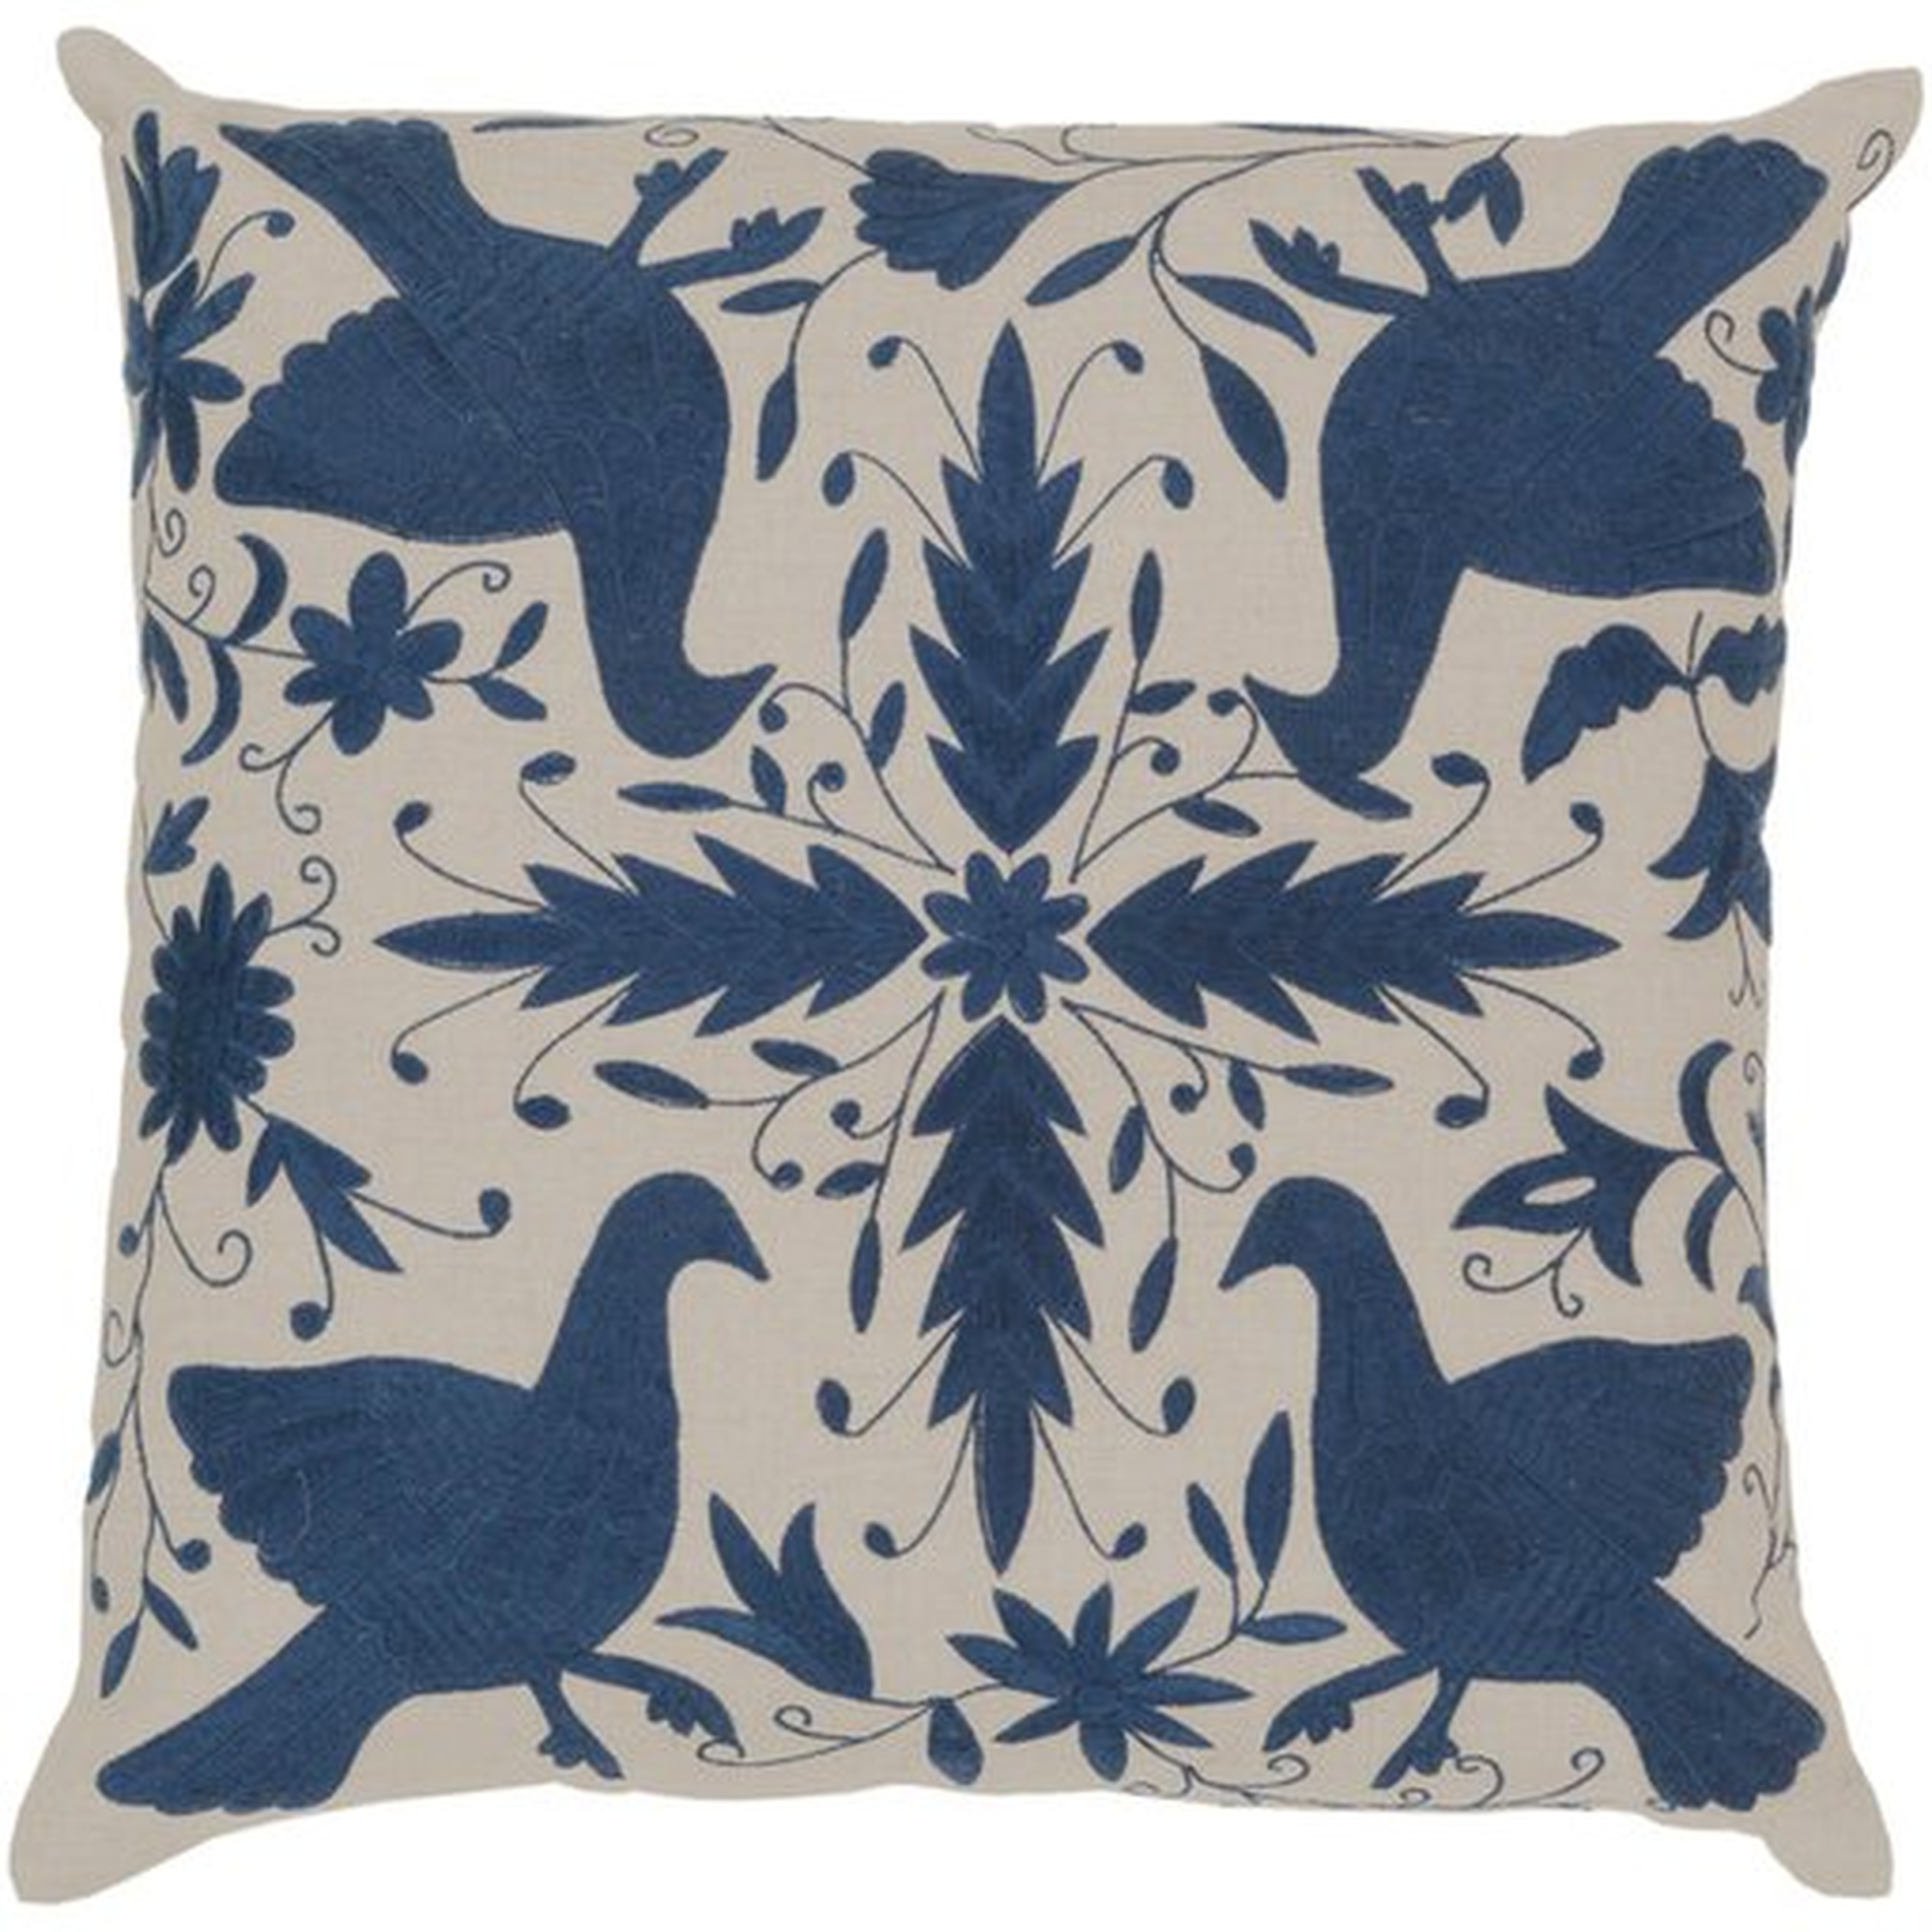 Otomi Throw Pillow, 20" x 20", with poly insert - Surya